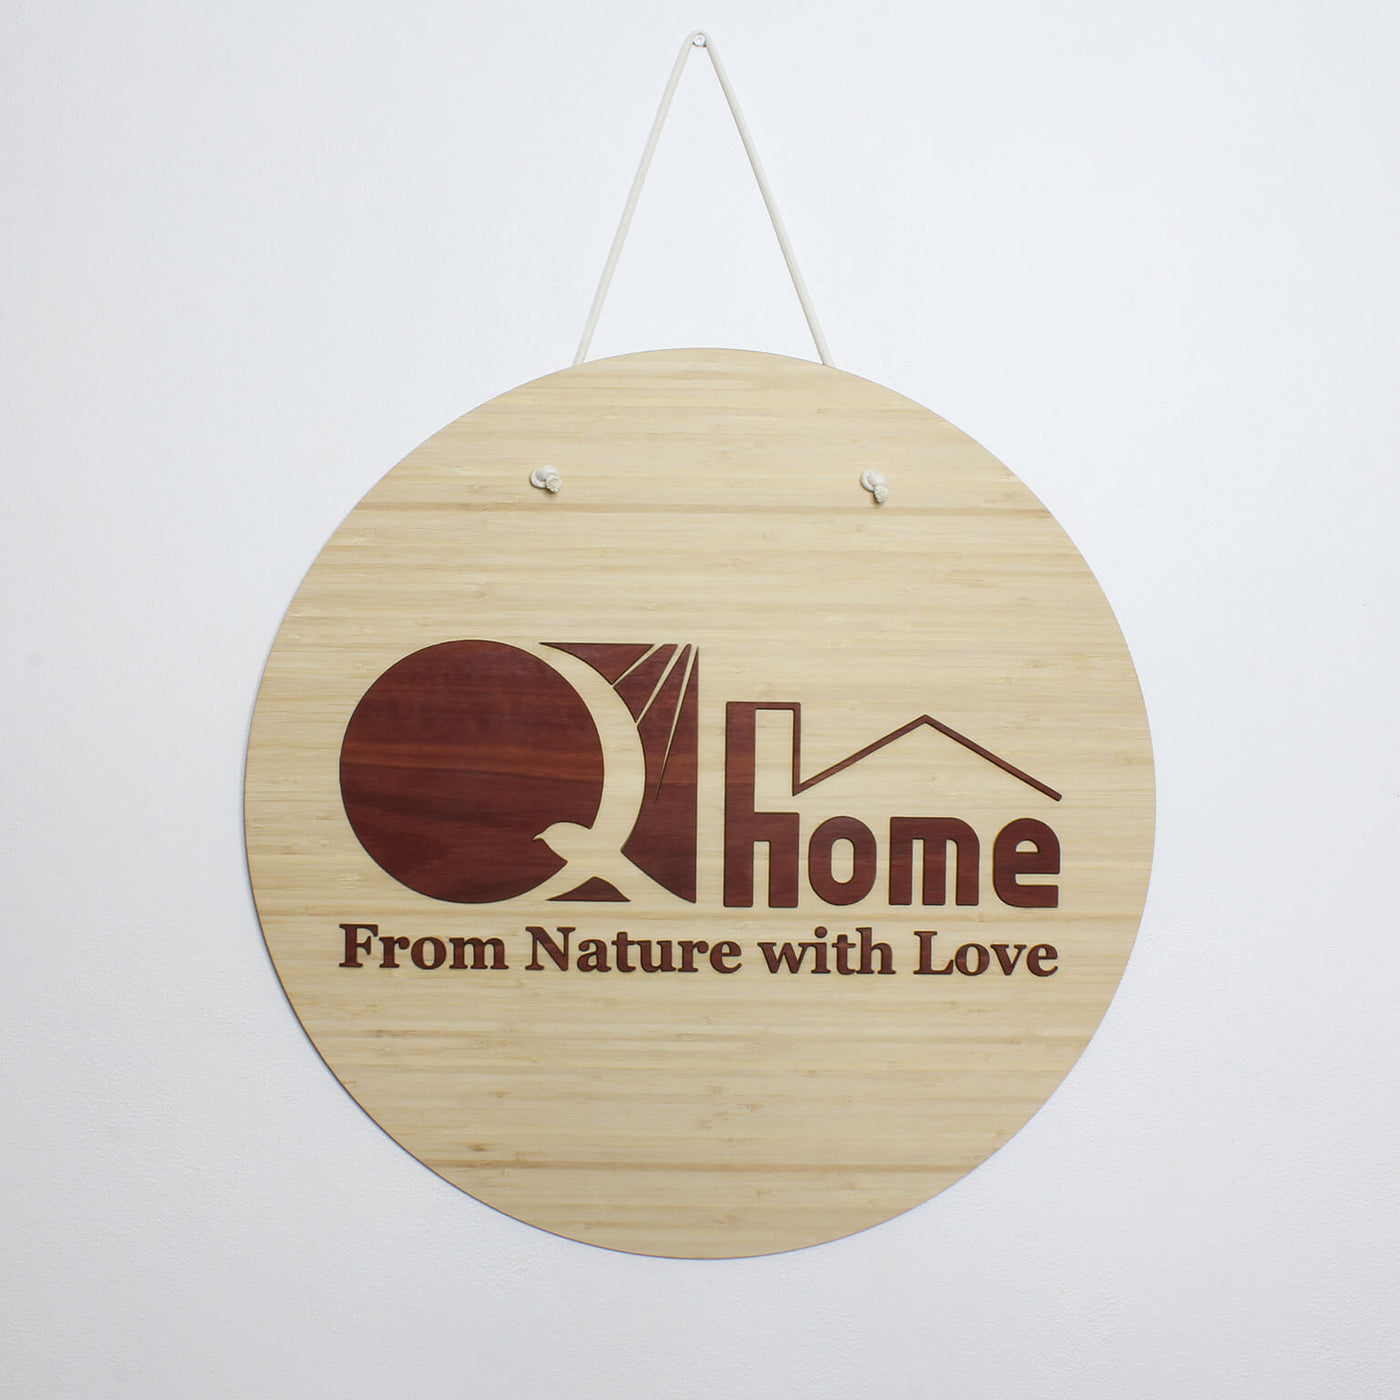 Round wooden business sign